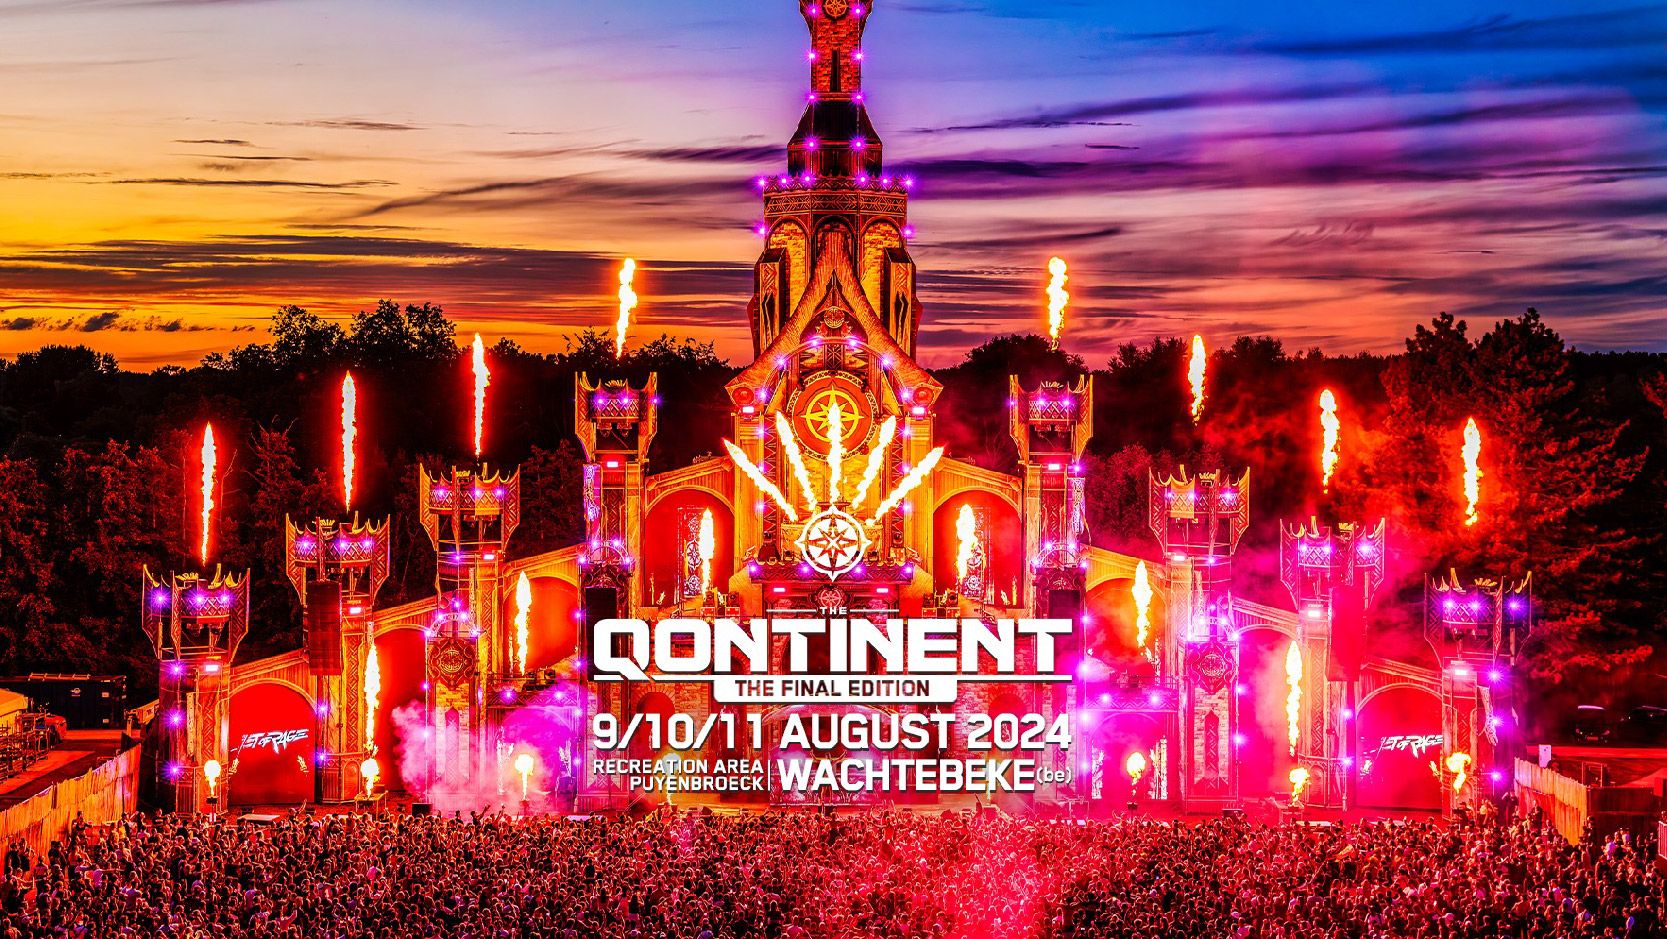 The Qontinent - The Final Edition cover